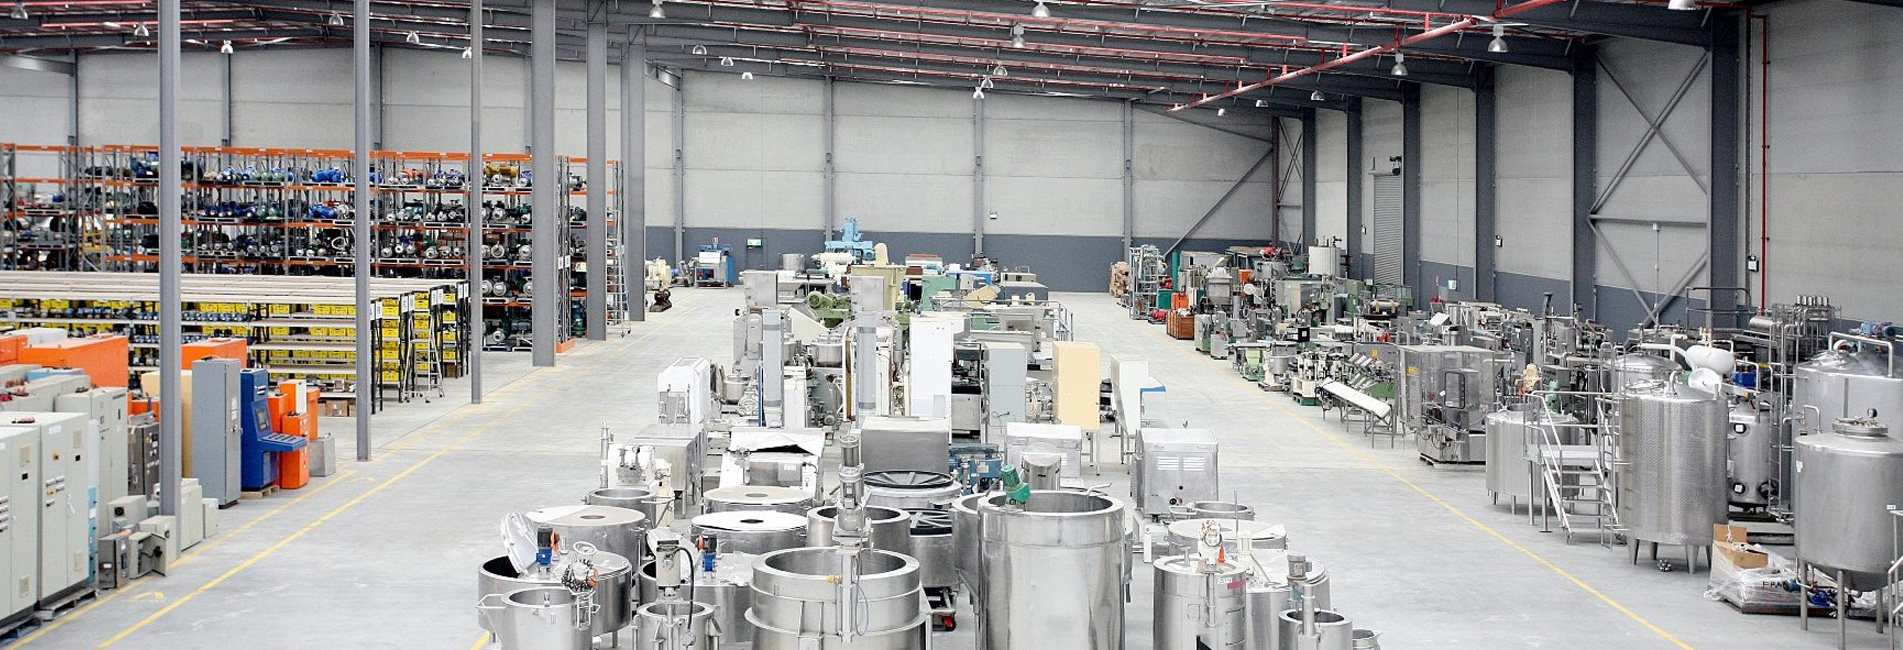 Machinery Wholesaler QLD, Process Machinery Online, Used Process Equipment Melbourne, New Process Equipment Sydney